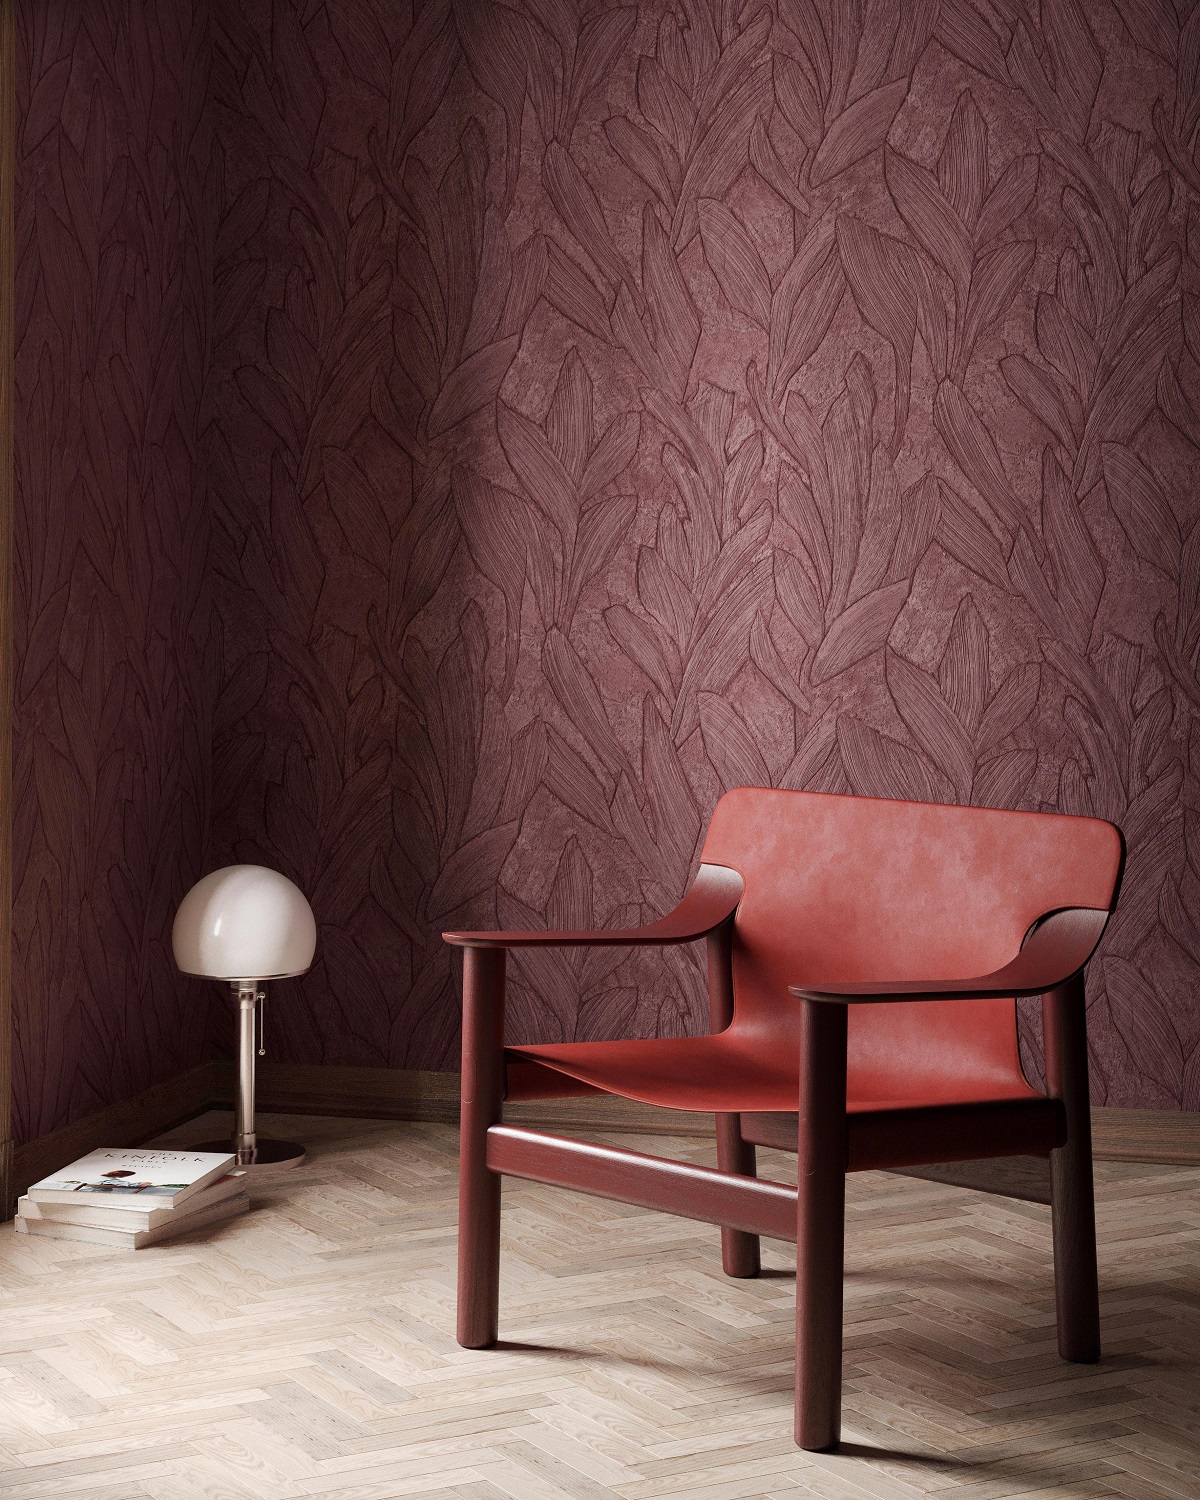 organic patterned wallcovering in terracotta red tones with leather chair